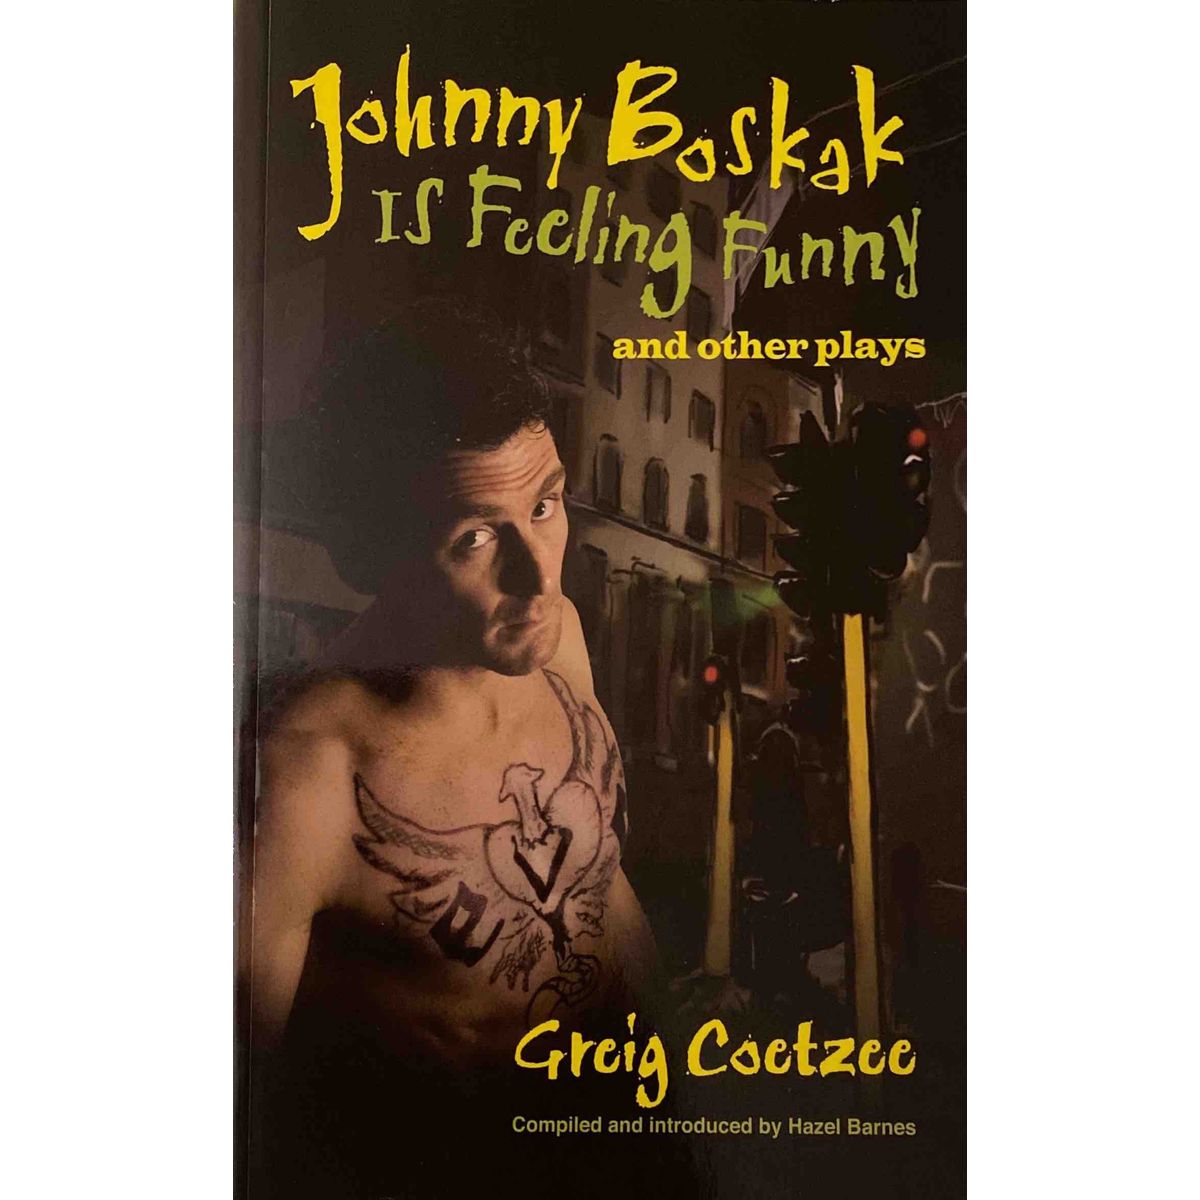 ISBN: 9781869141806 / 1869141806 - Johnny Boskak is Feeling Funny and Other Plays by Greig Coetzee, Signed [1988]